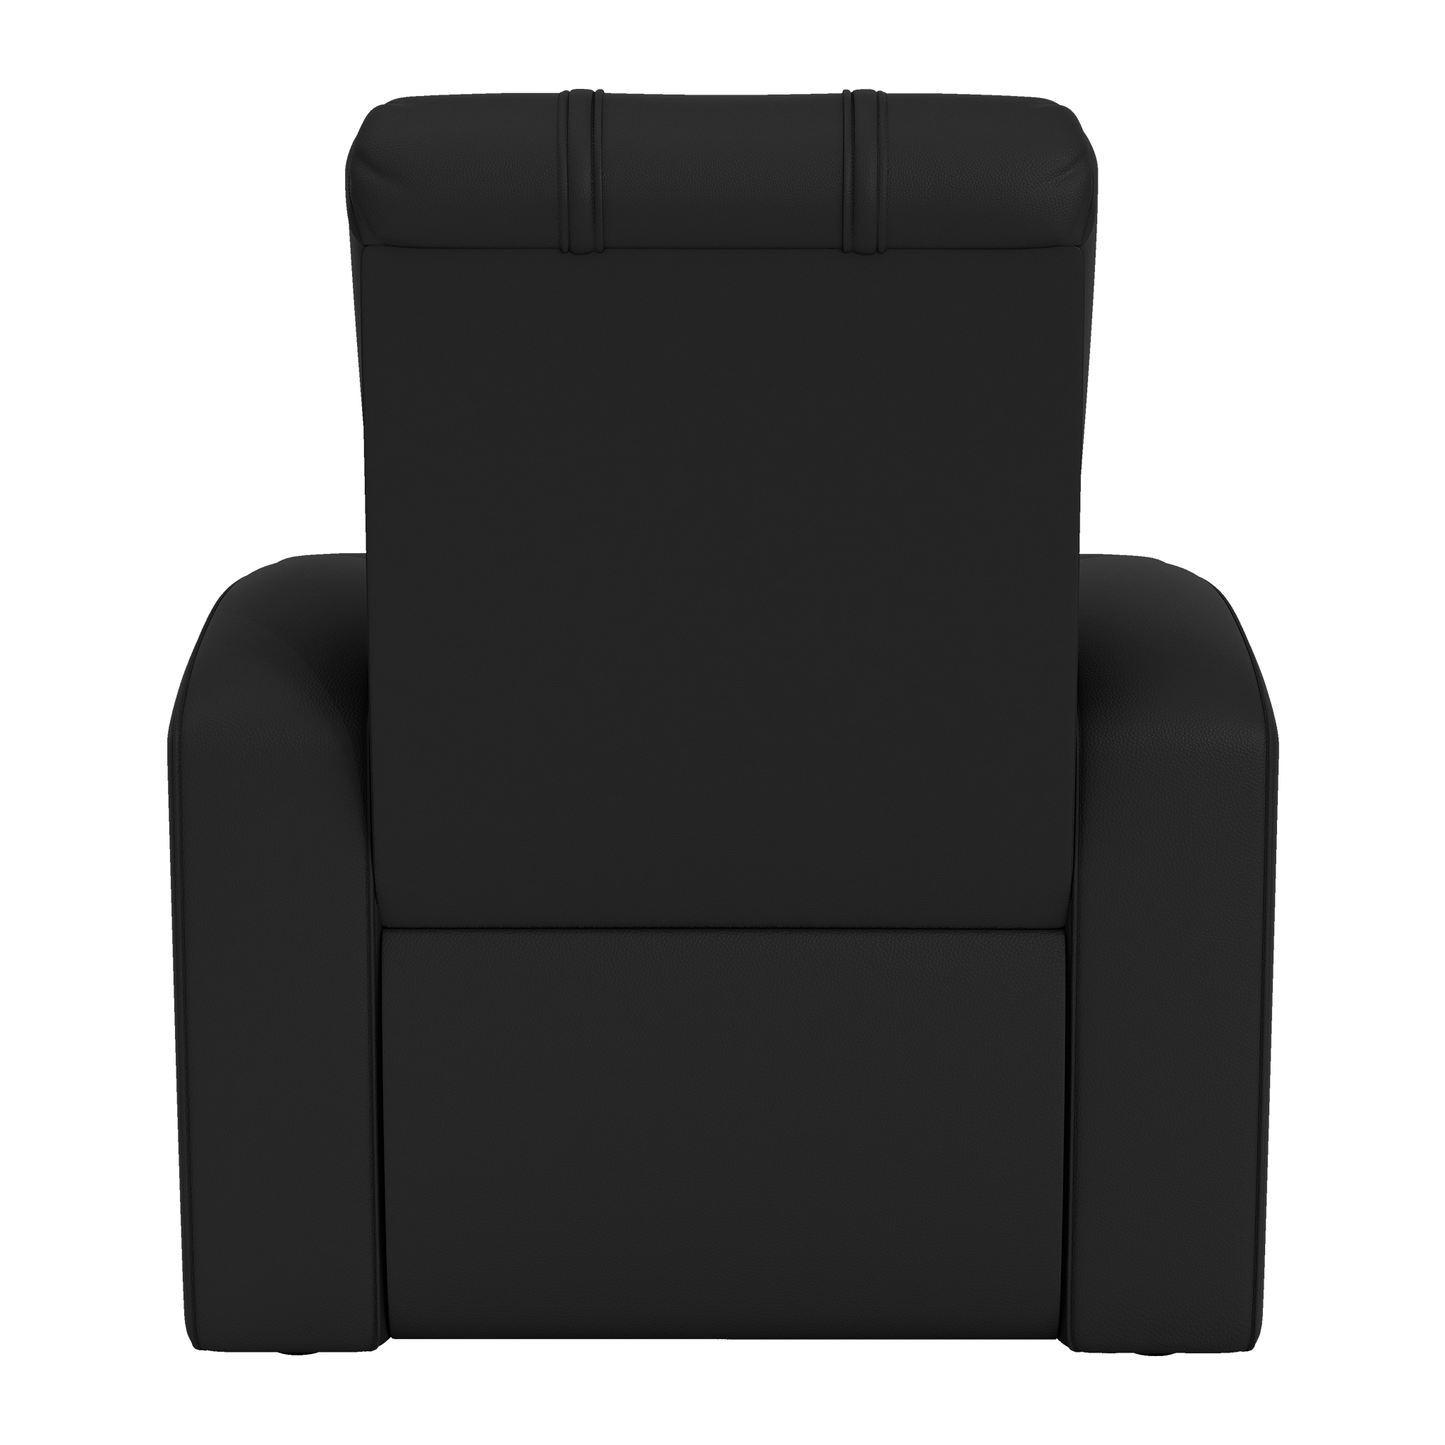 Relax Home Theater Recliner with Tampa Bay Lightning Logo